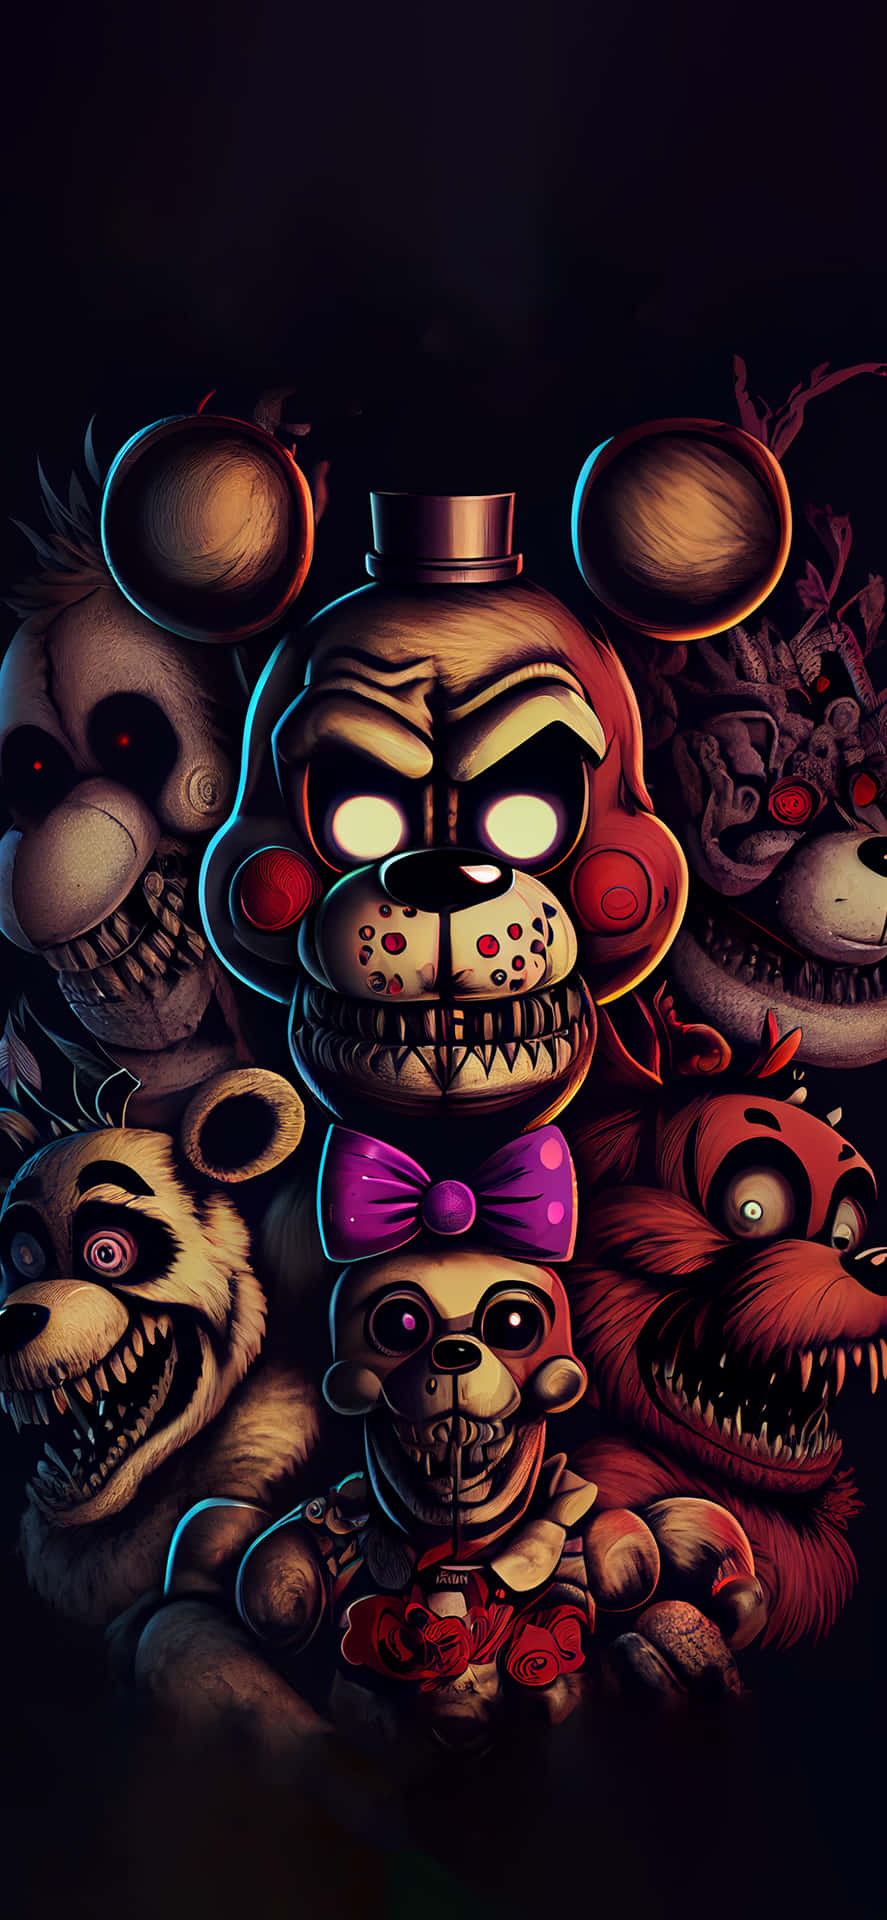 Scary Fnaf Characters in Dark Setting Wallpaper